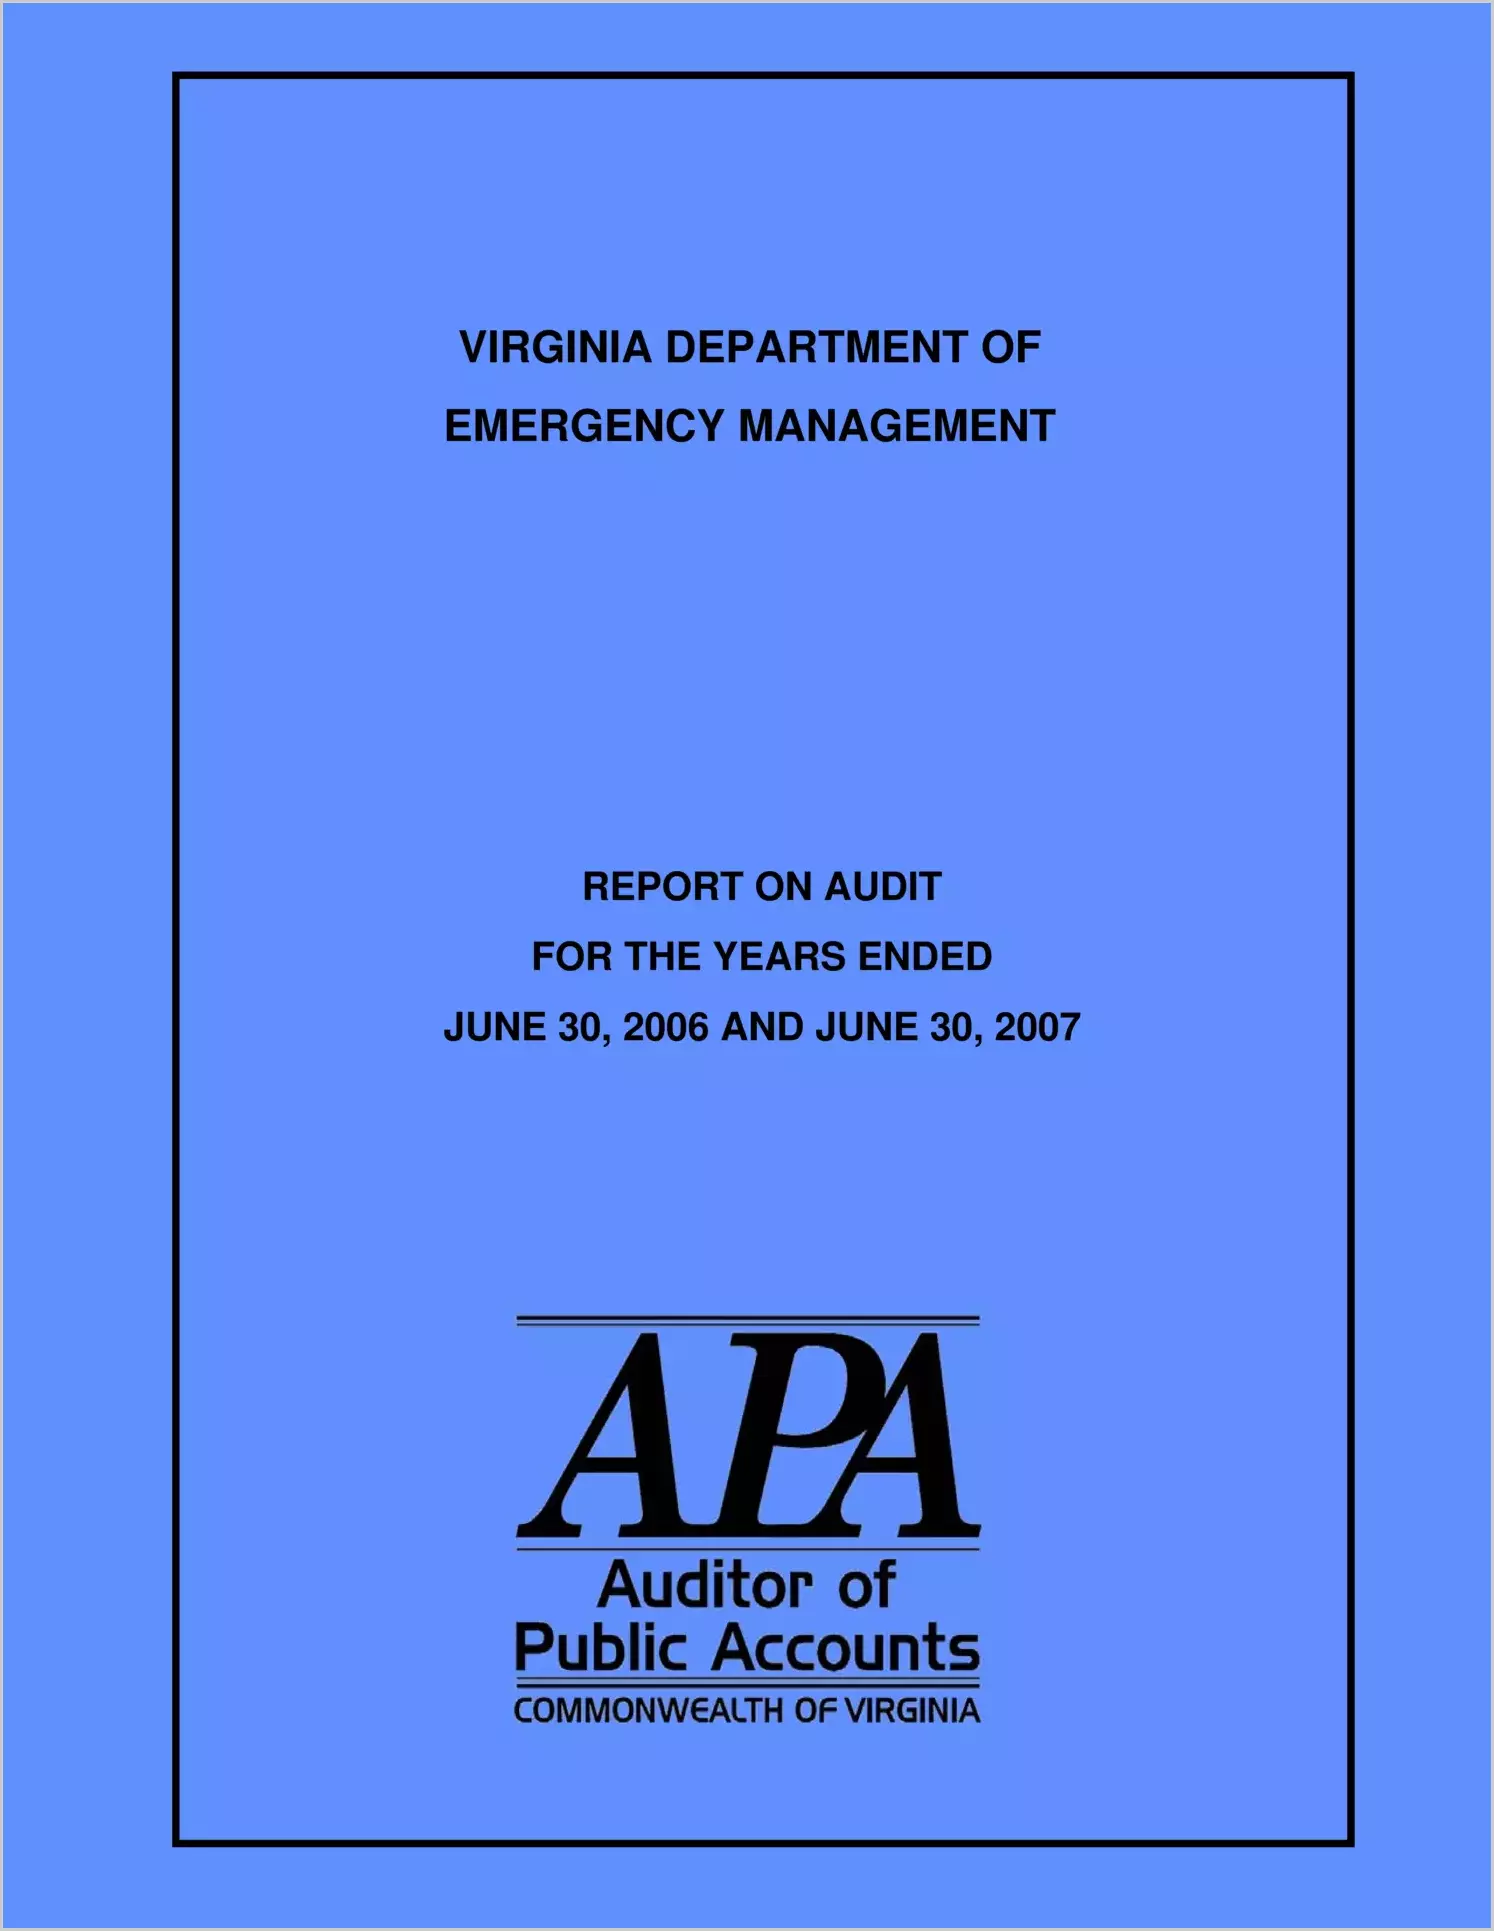 Virginia Department of Emergency Management report on audit for the years ended June 30, 2006 and June 30, 2007